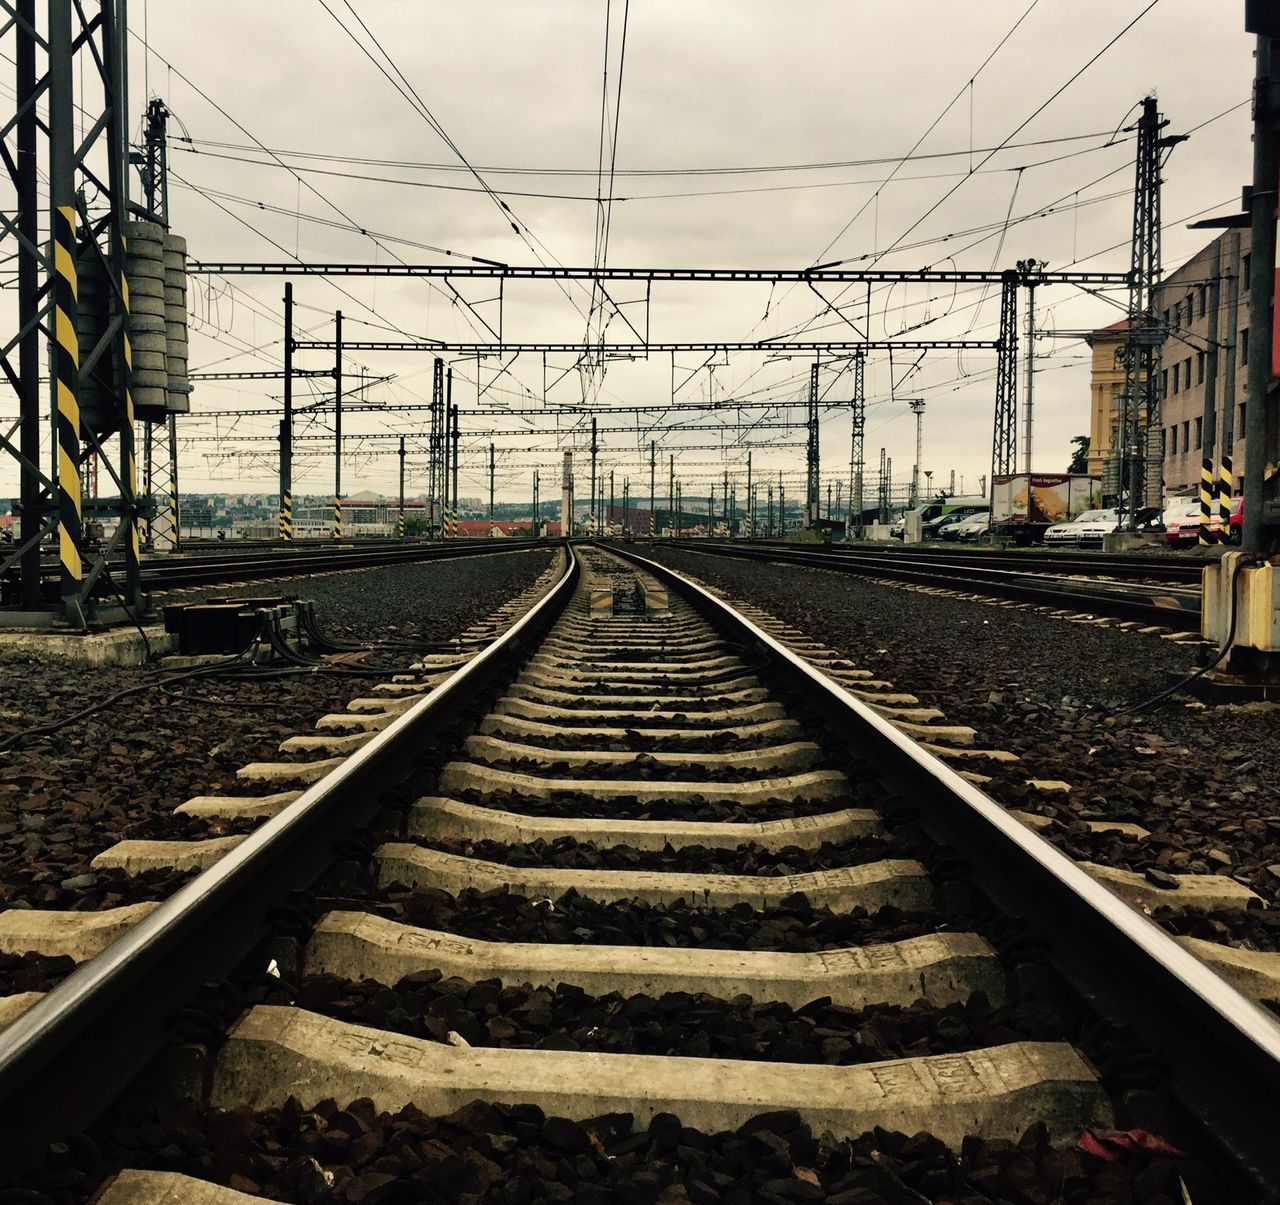 Railroad tracks and overhead cables.